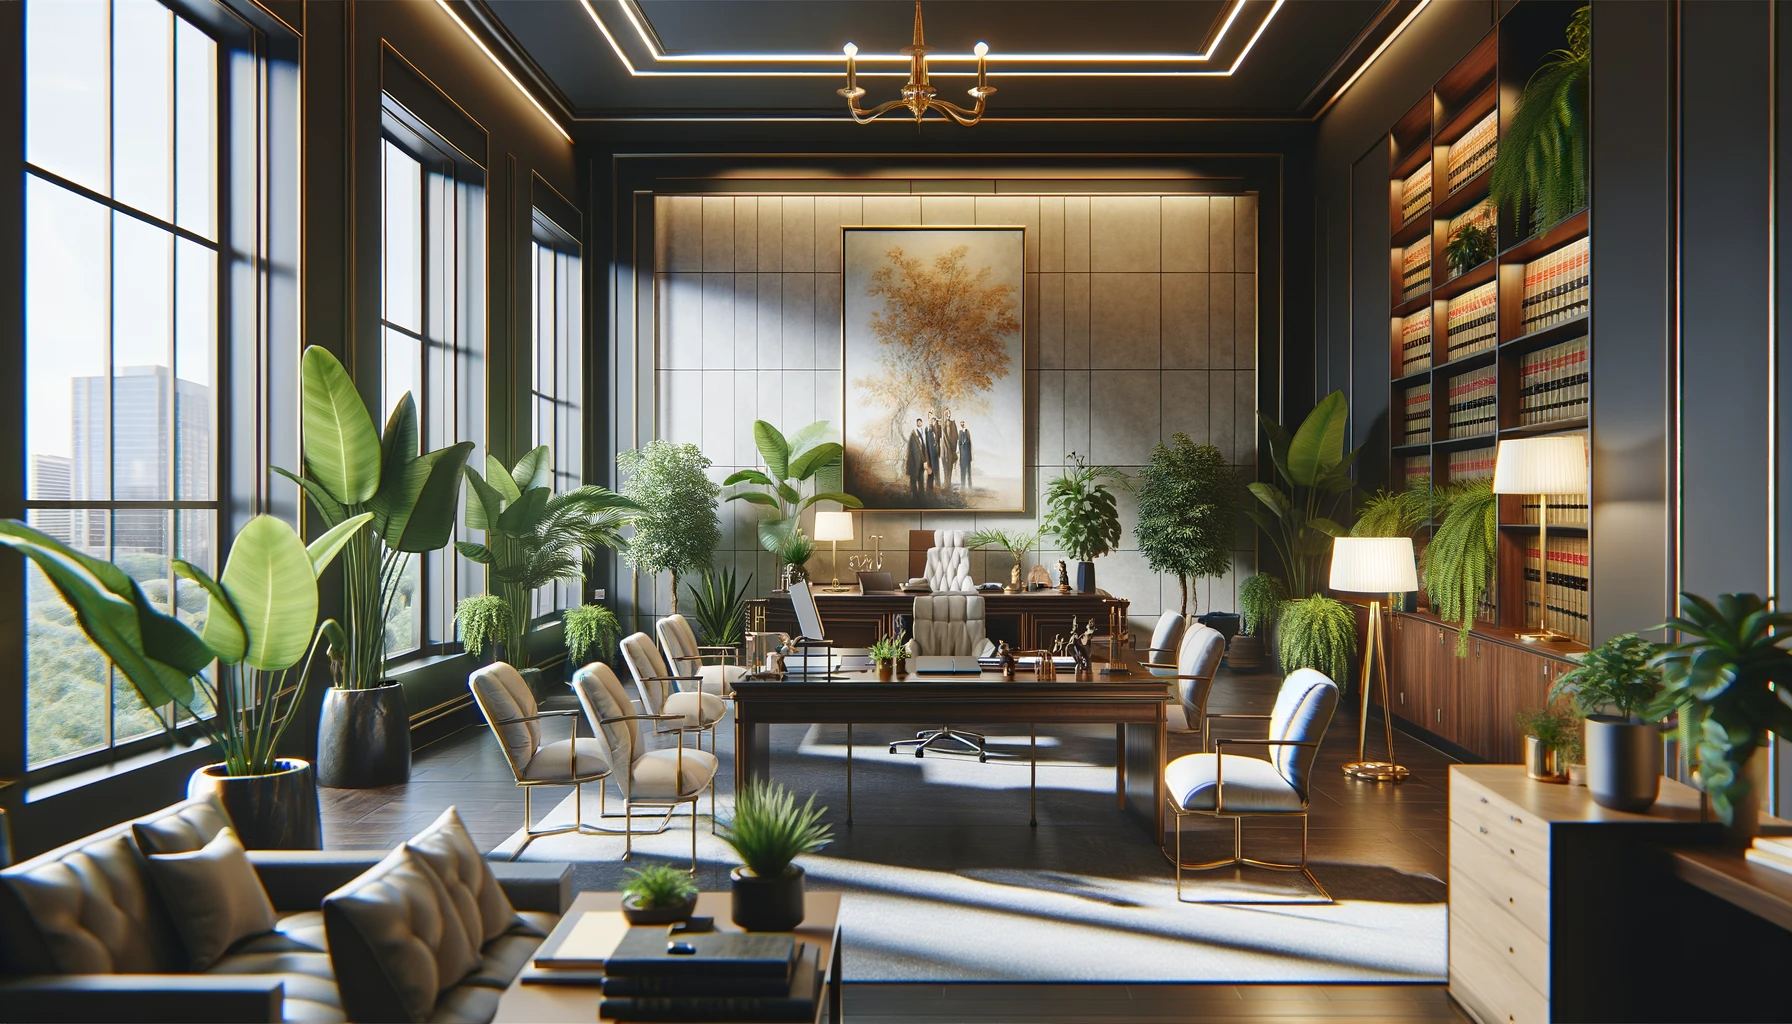 DALL·E 2023-12-19 16.45.19 - An image of a law firm office interior elegantly decorated with artwork and indoor plants. The setting should showcase a professional yet aestheticall